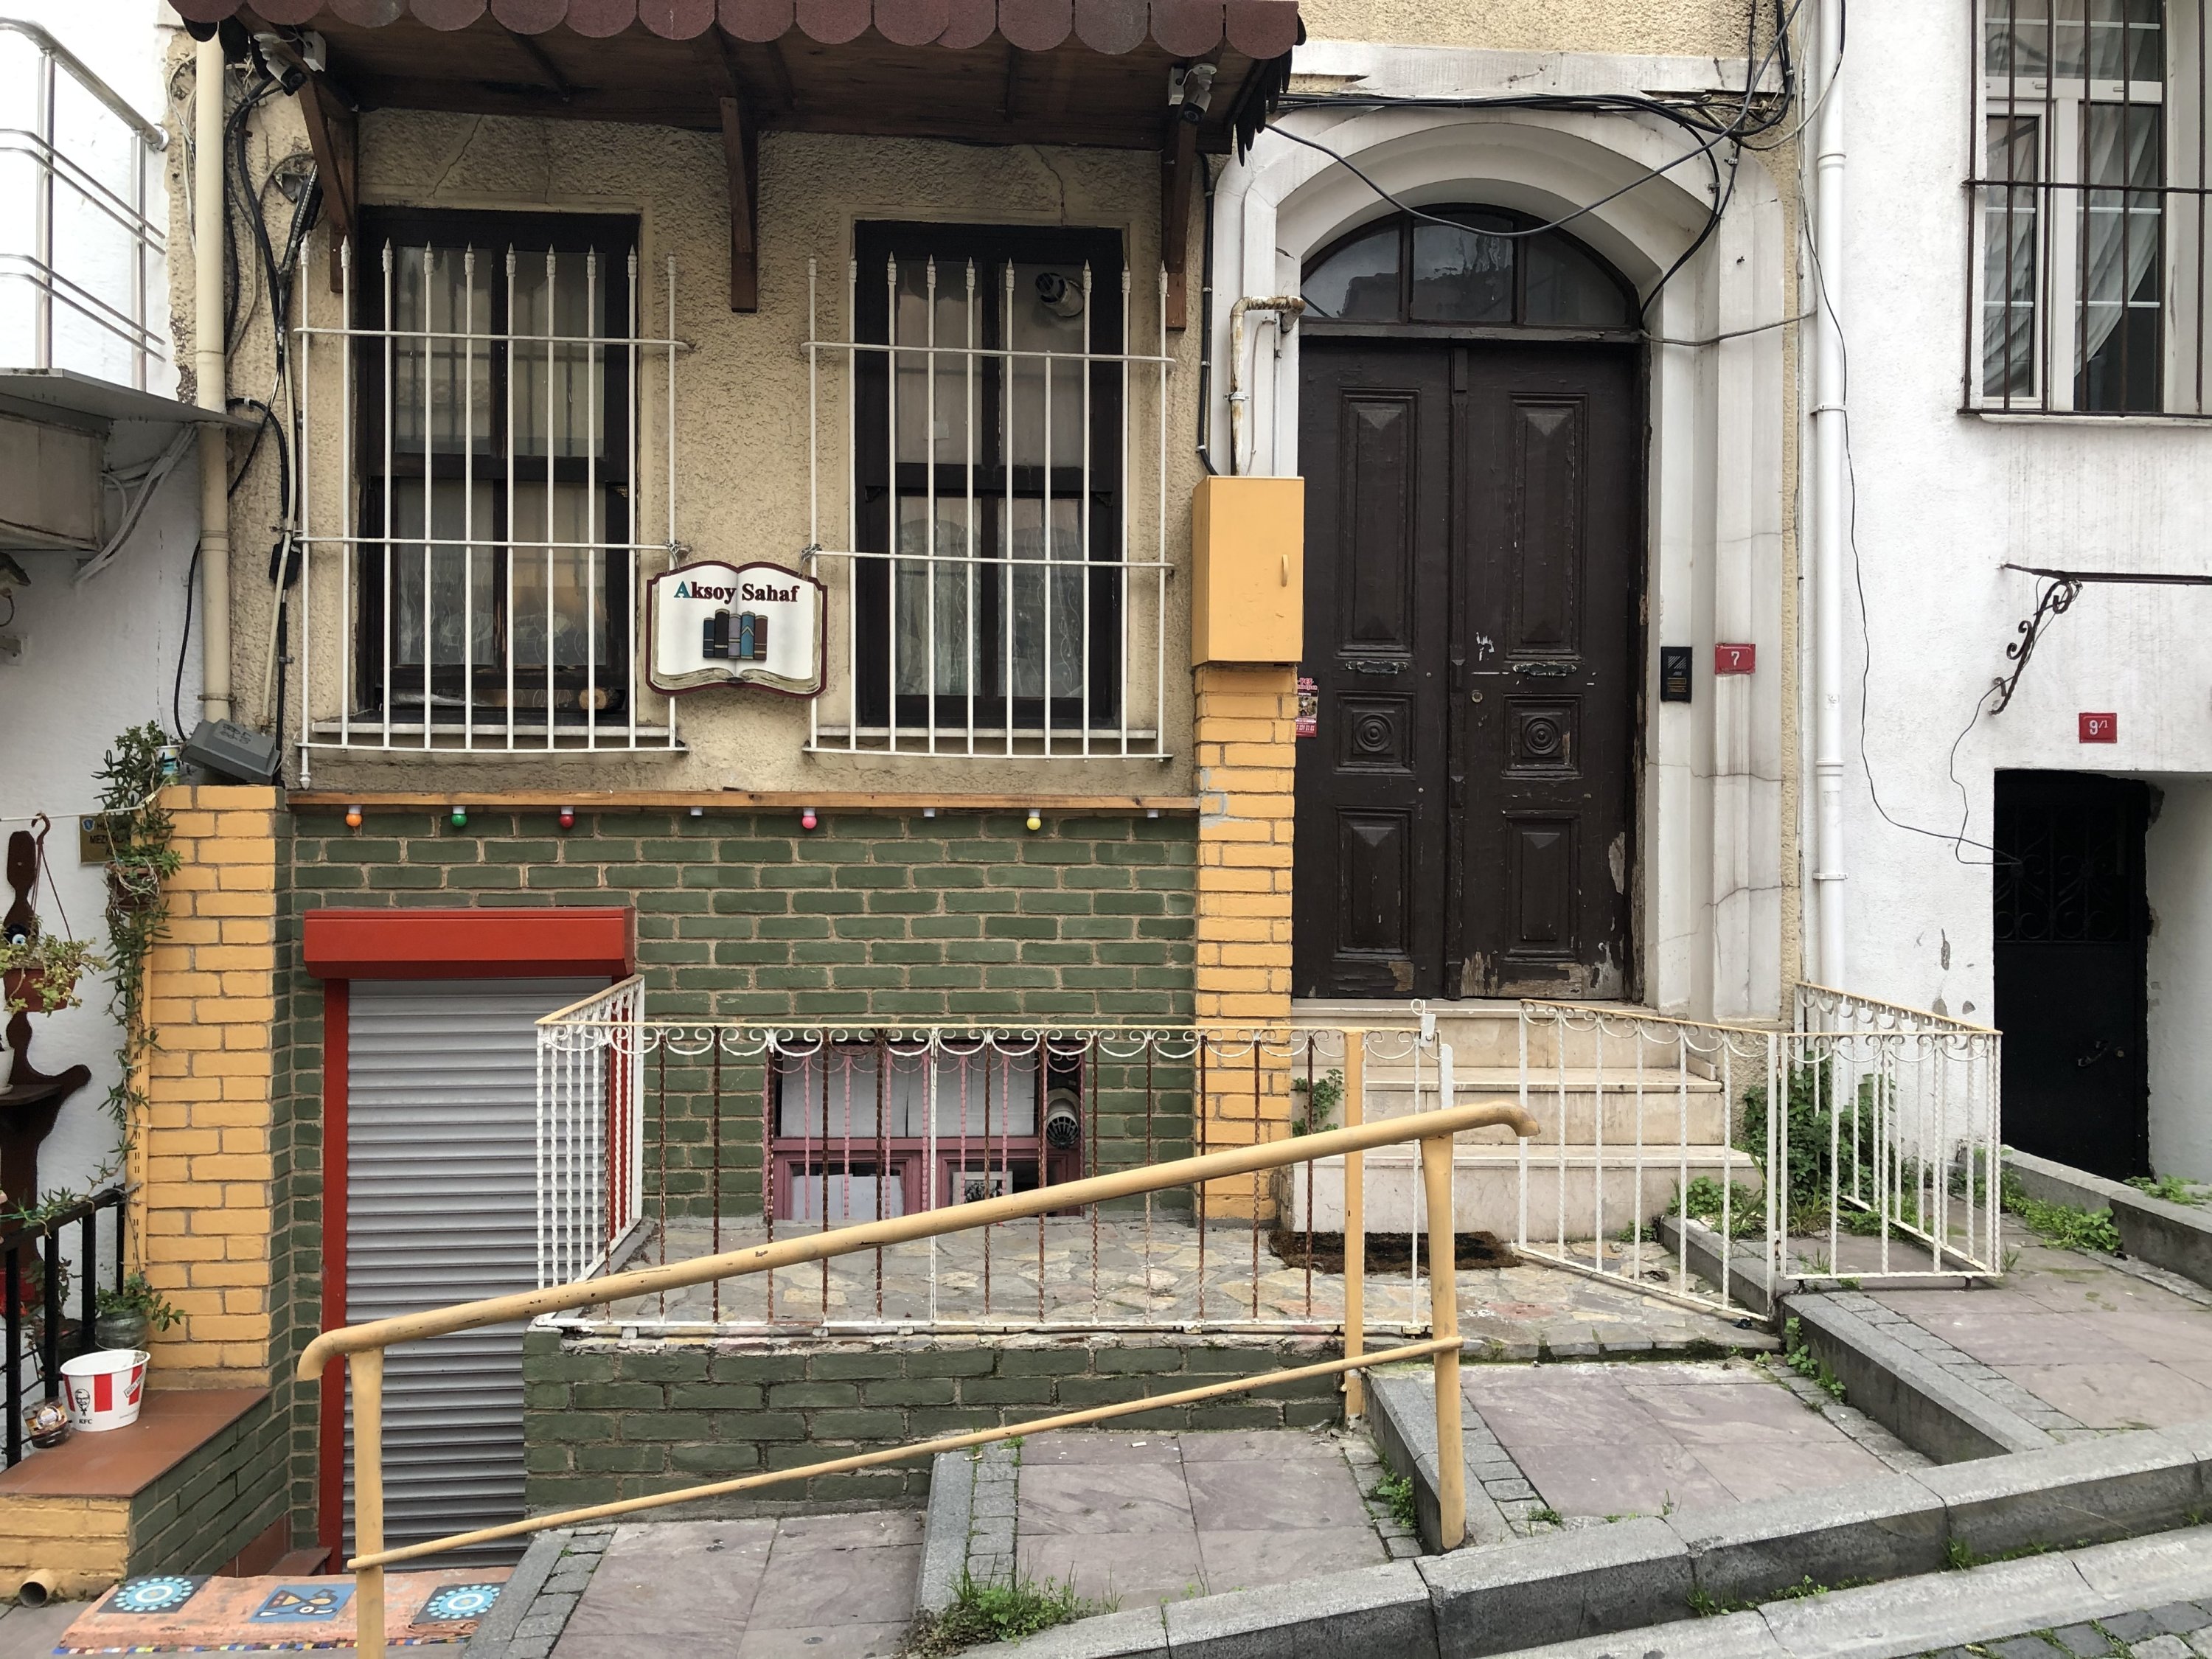 Closed Aksoy Sahaf is seen along the sloping street where it is located in Istanbul